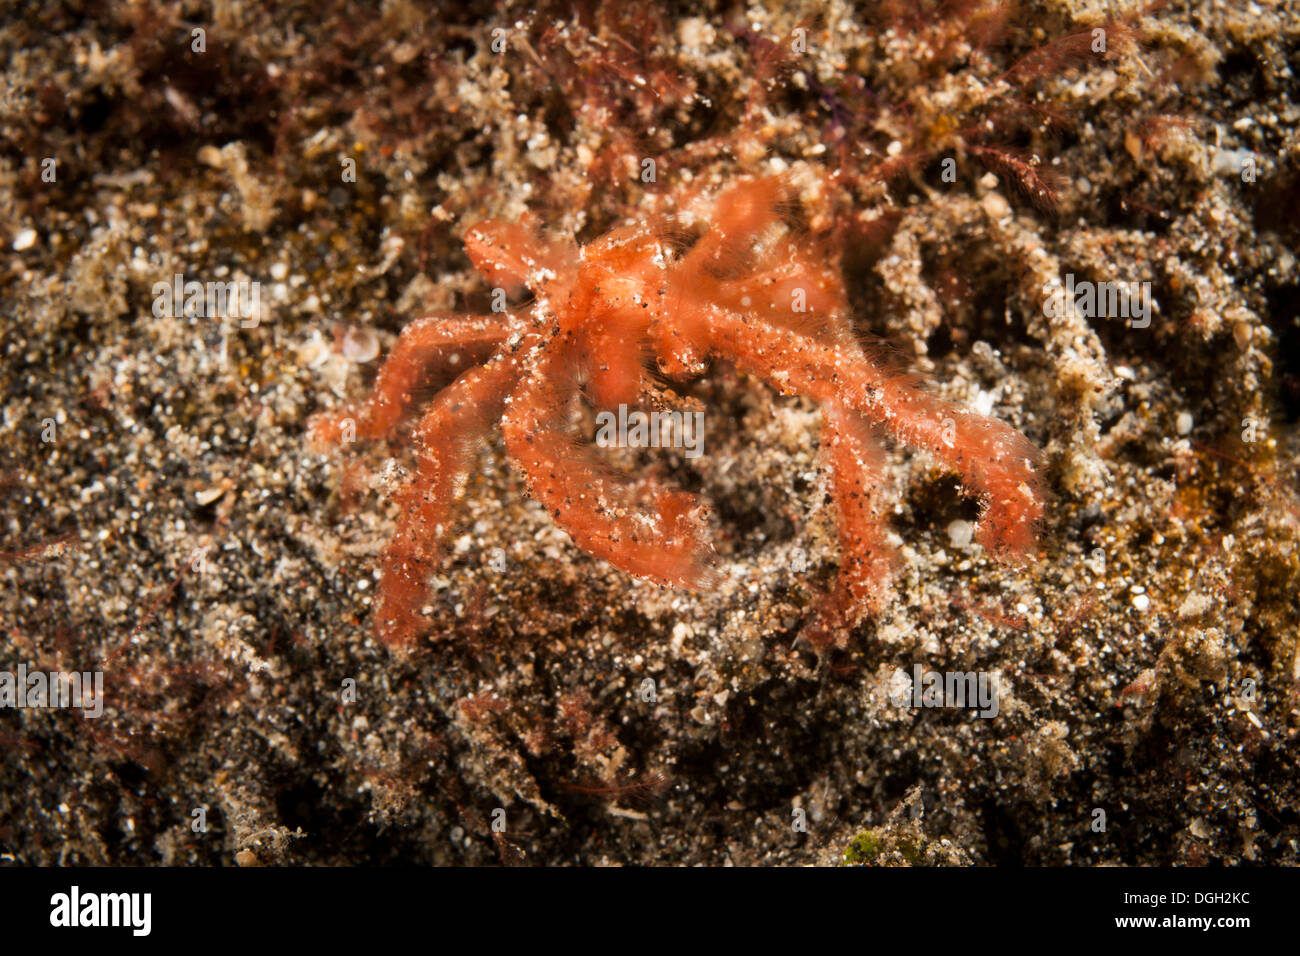 Orangutan Crab (Oncinopus sp.) in threat display in the Lembeh Strait off North Sulawesi, Indonesia. Stock Photo